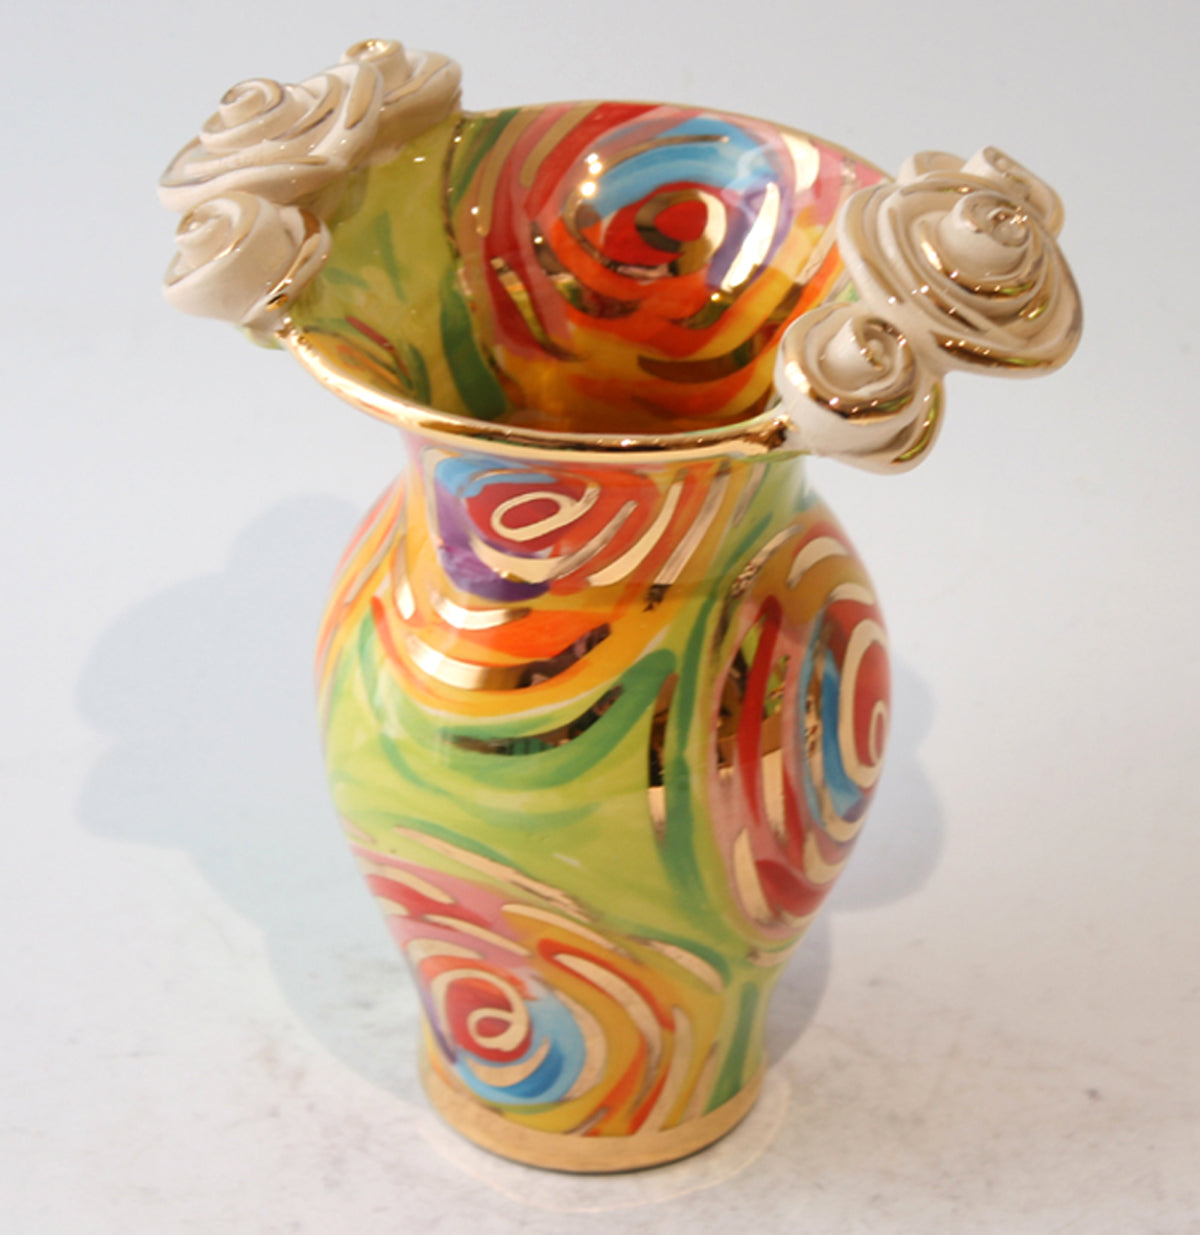 Tiny Rose Edged Vase in Green Swirls - MaryRoseYoung